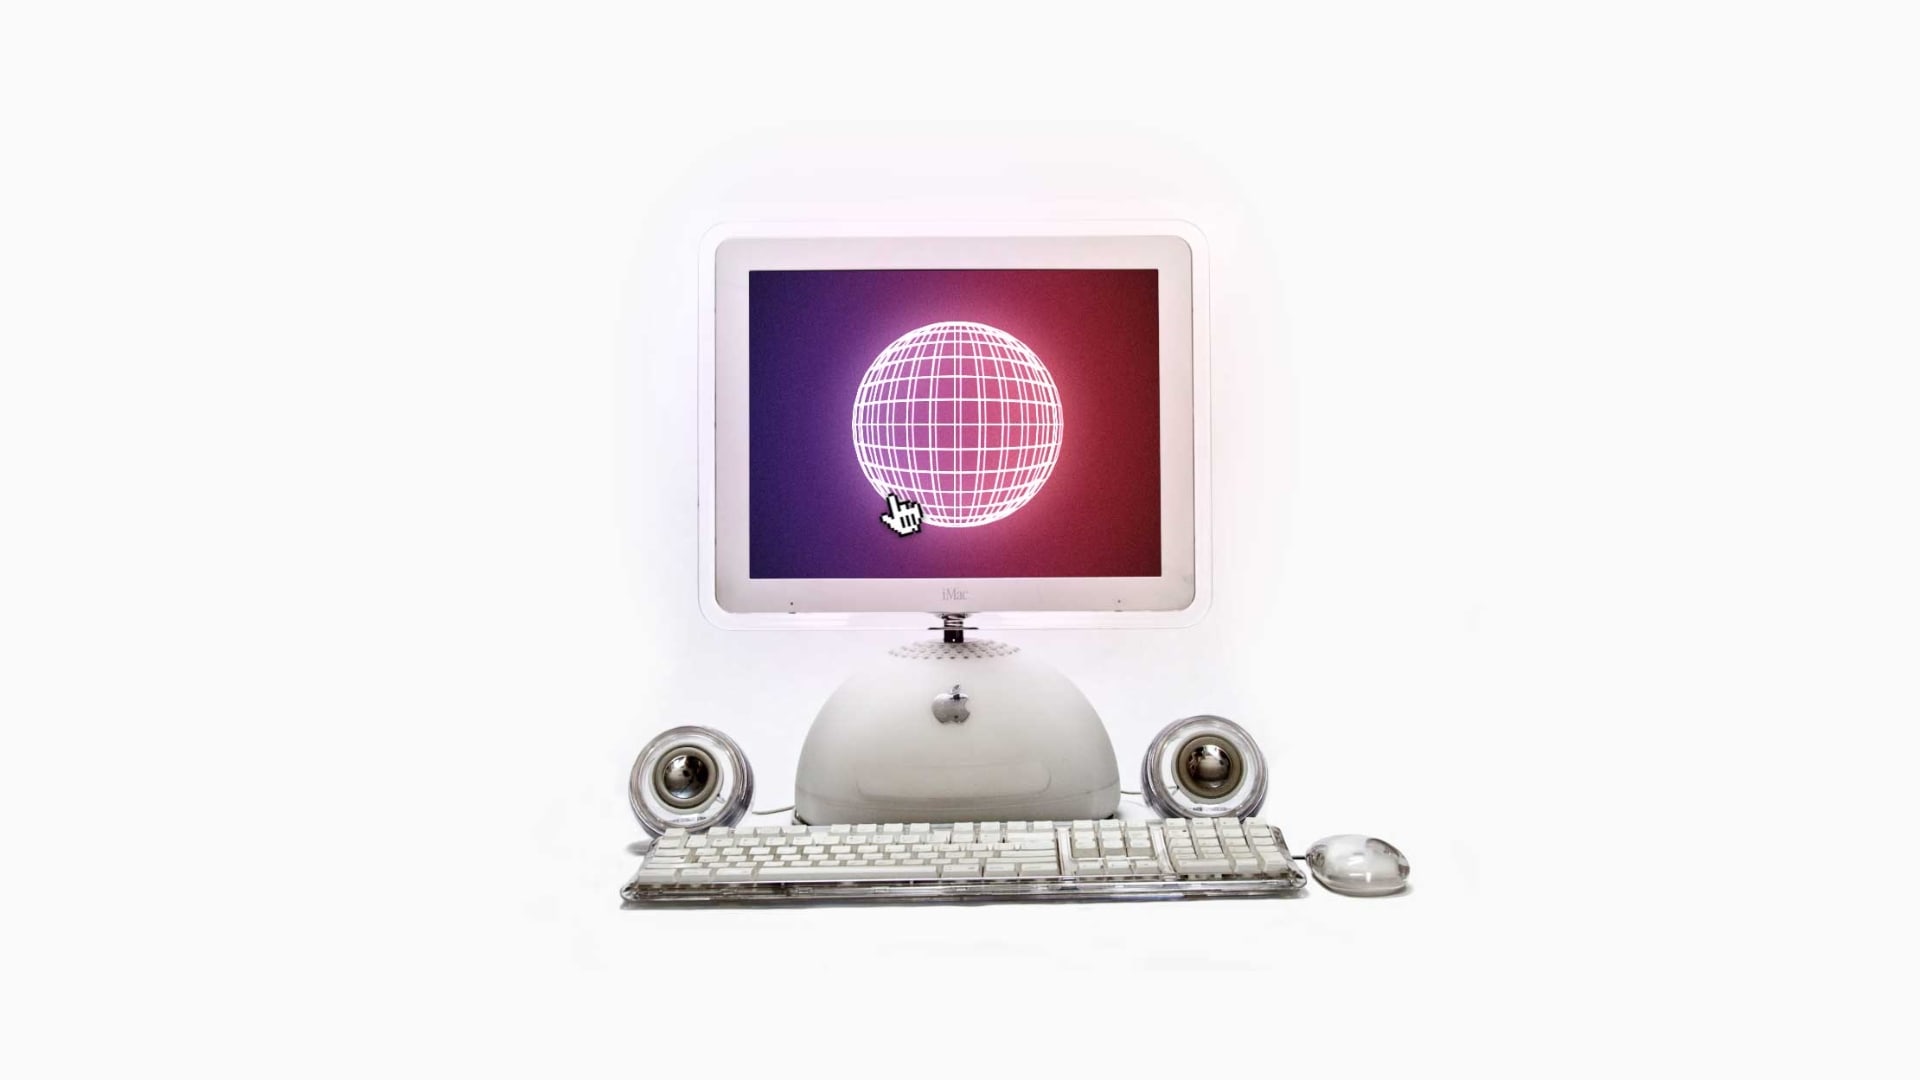 White iMac G4 with a colorful illustration of a globe in it